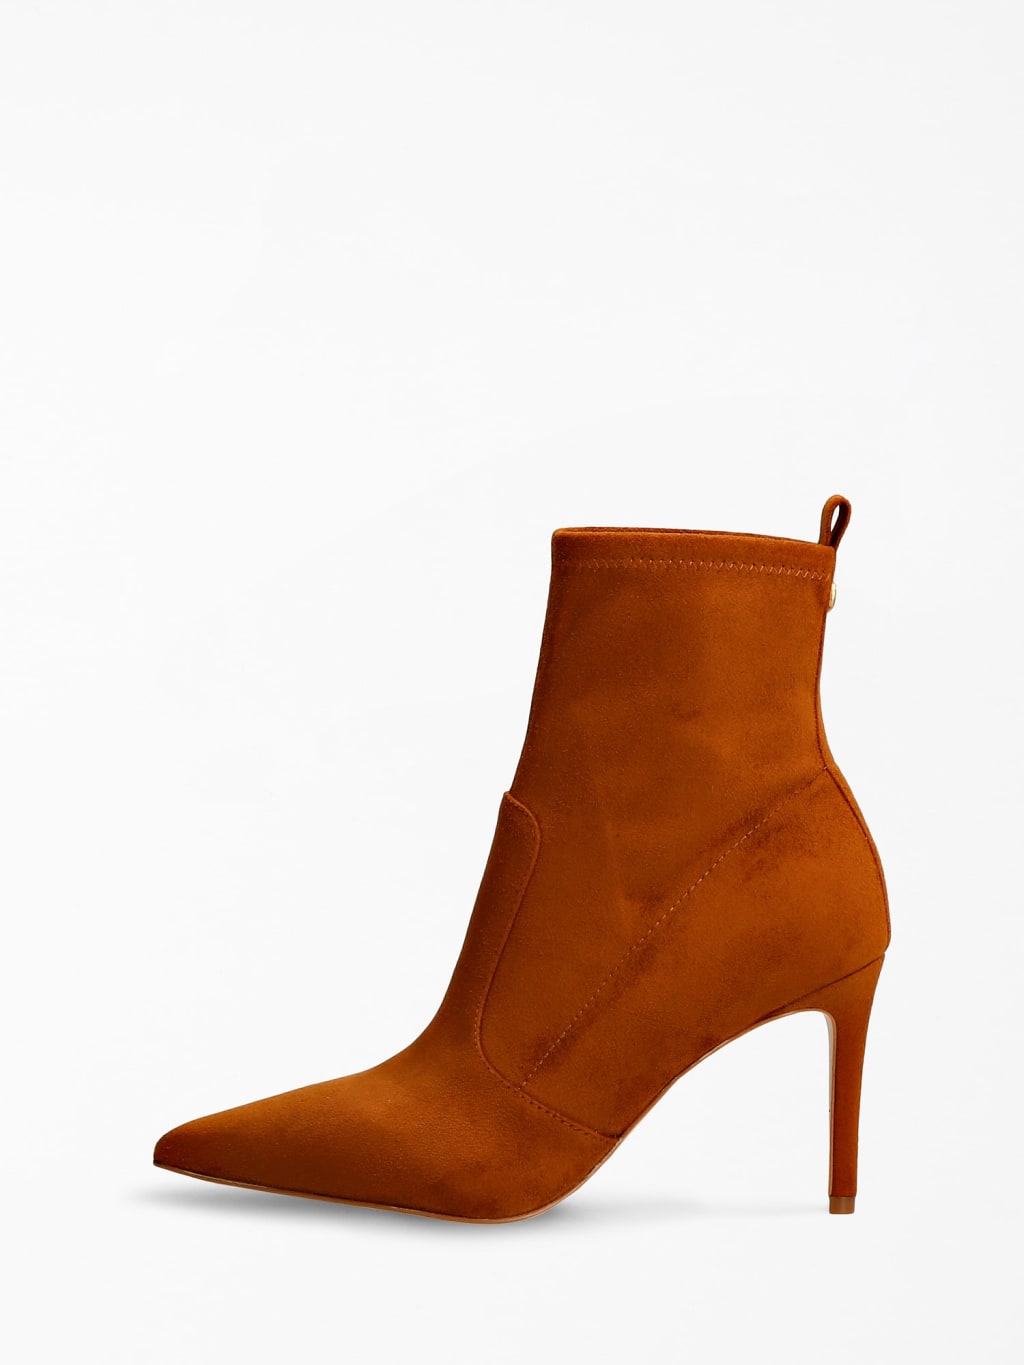 Guess bootie suede